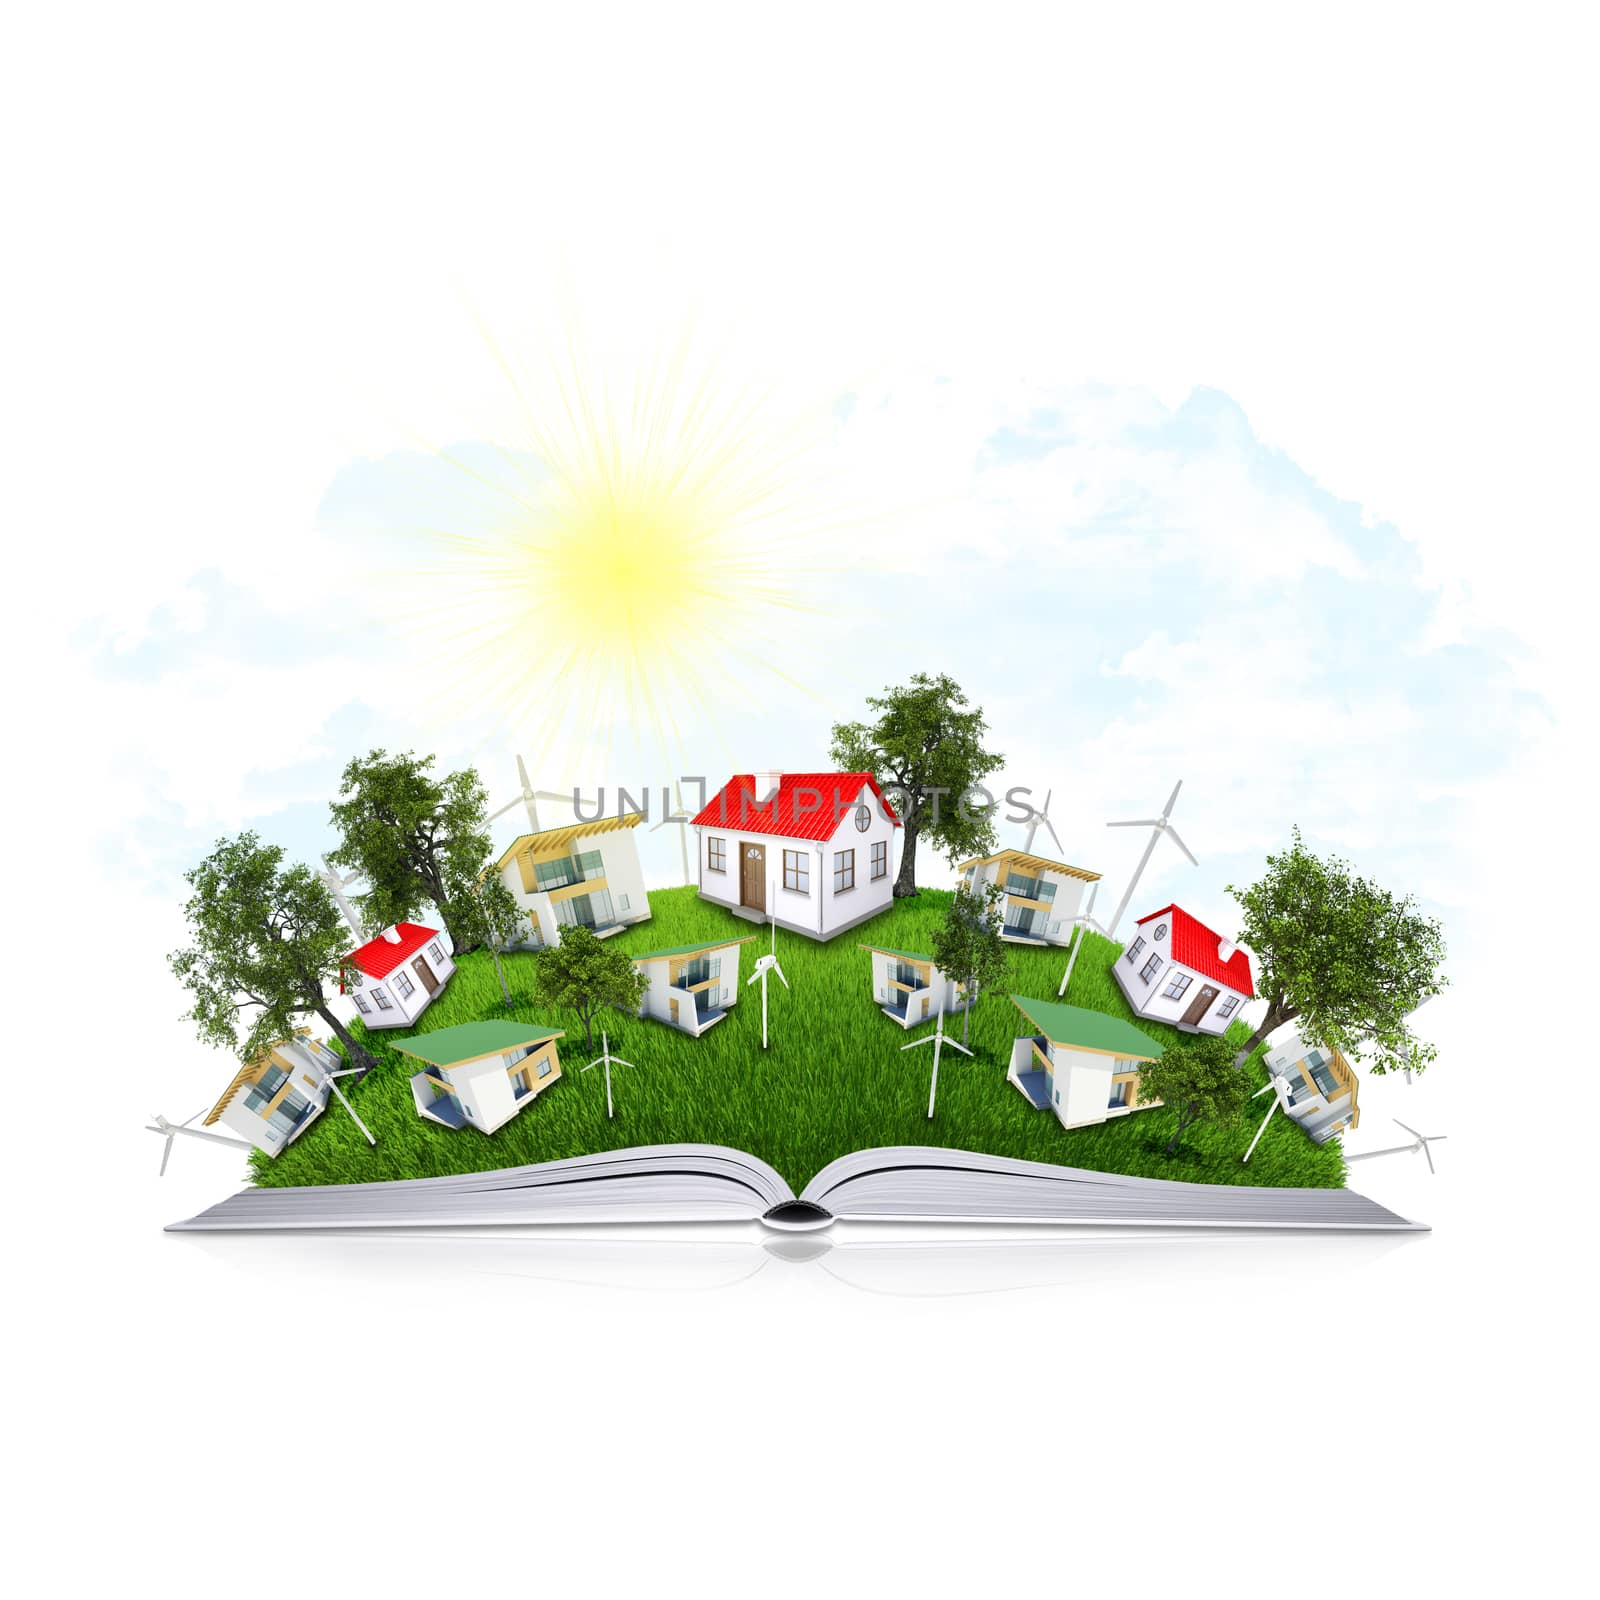 On the pages of an open book is grass, trees and houses. White background